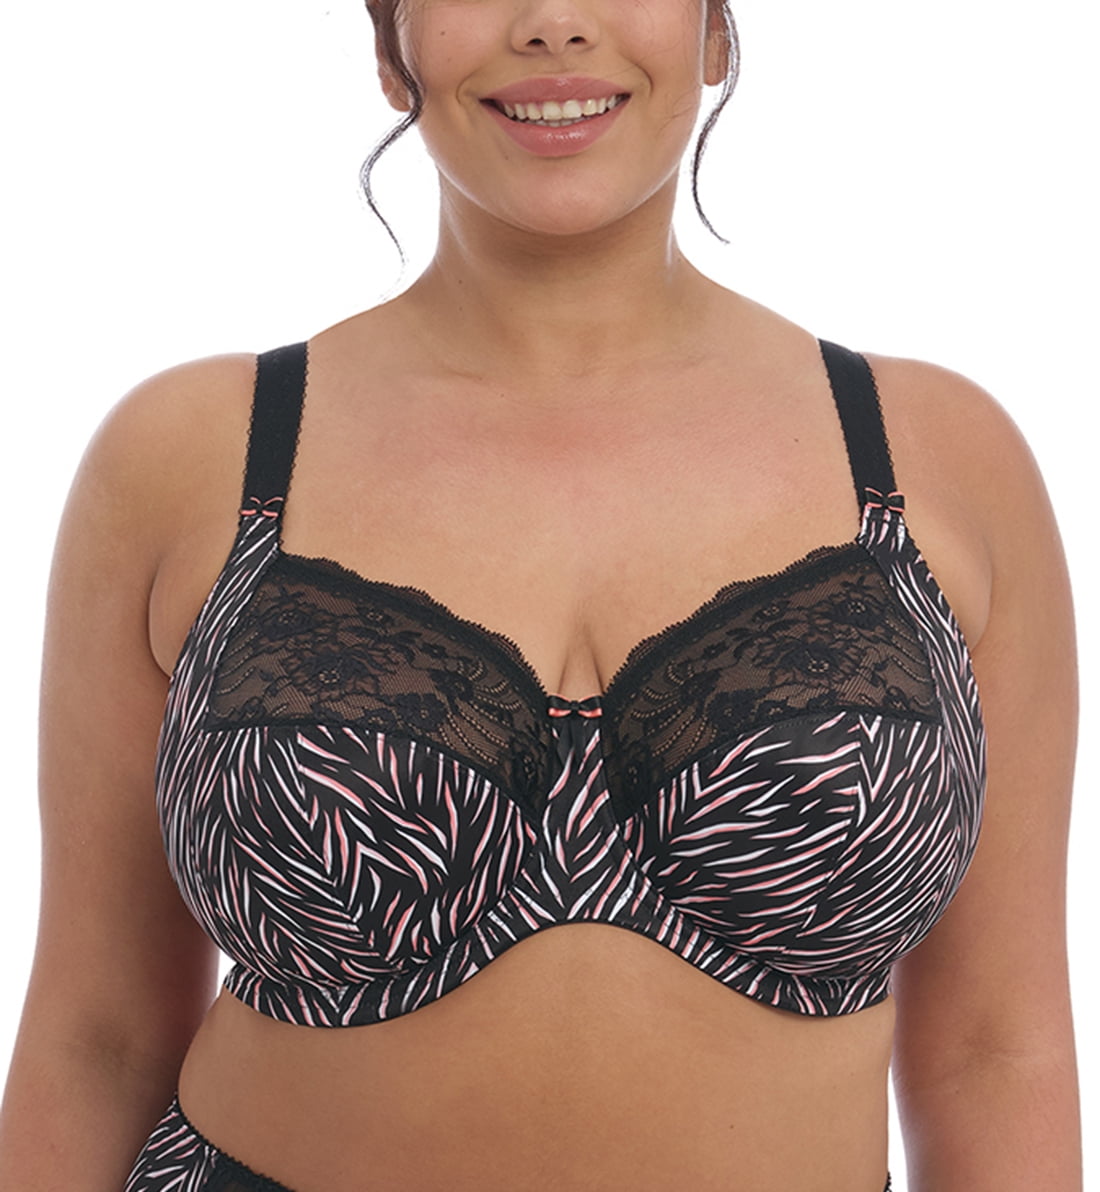 Elomi Morgan Stretch Lace Banded Underwire Bra (4110)- Pink Floral